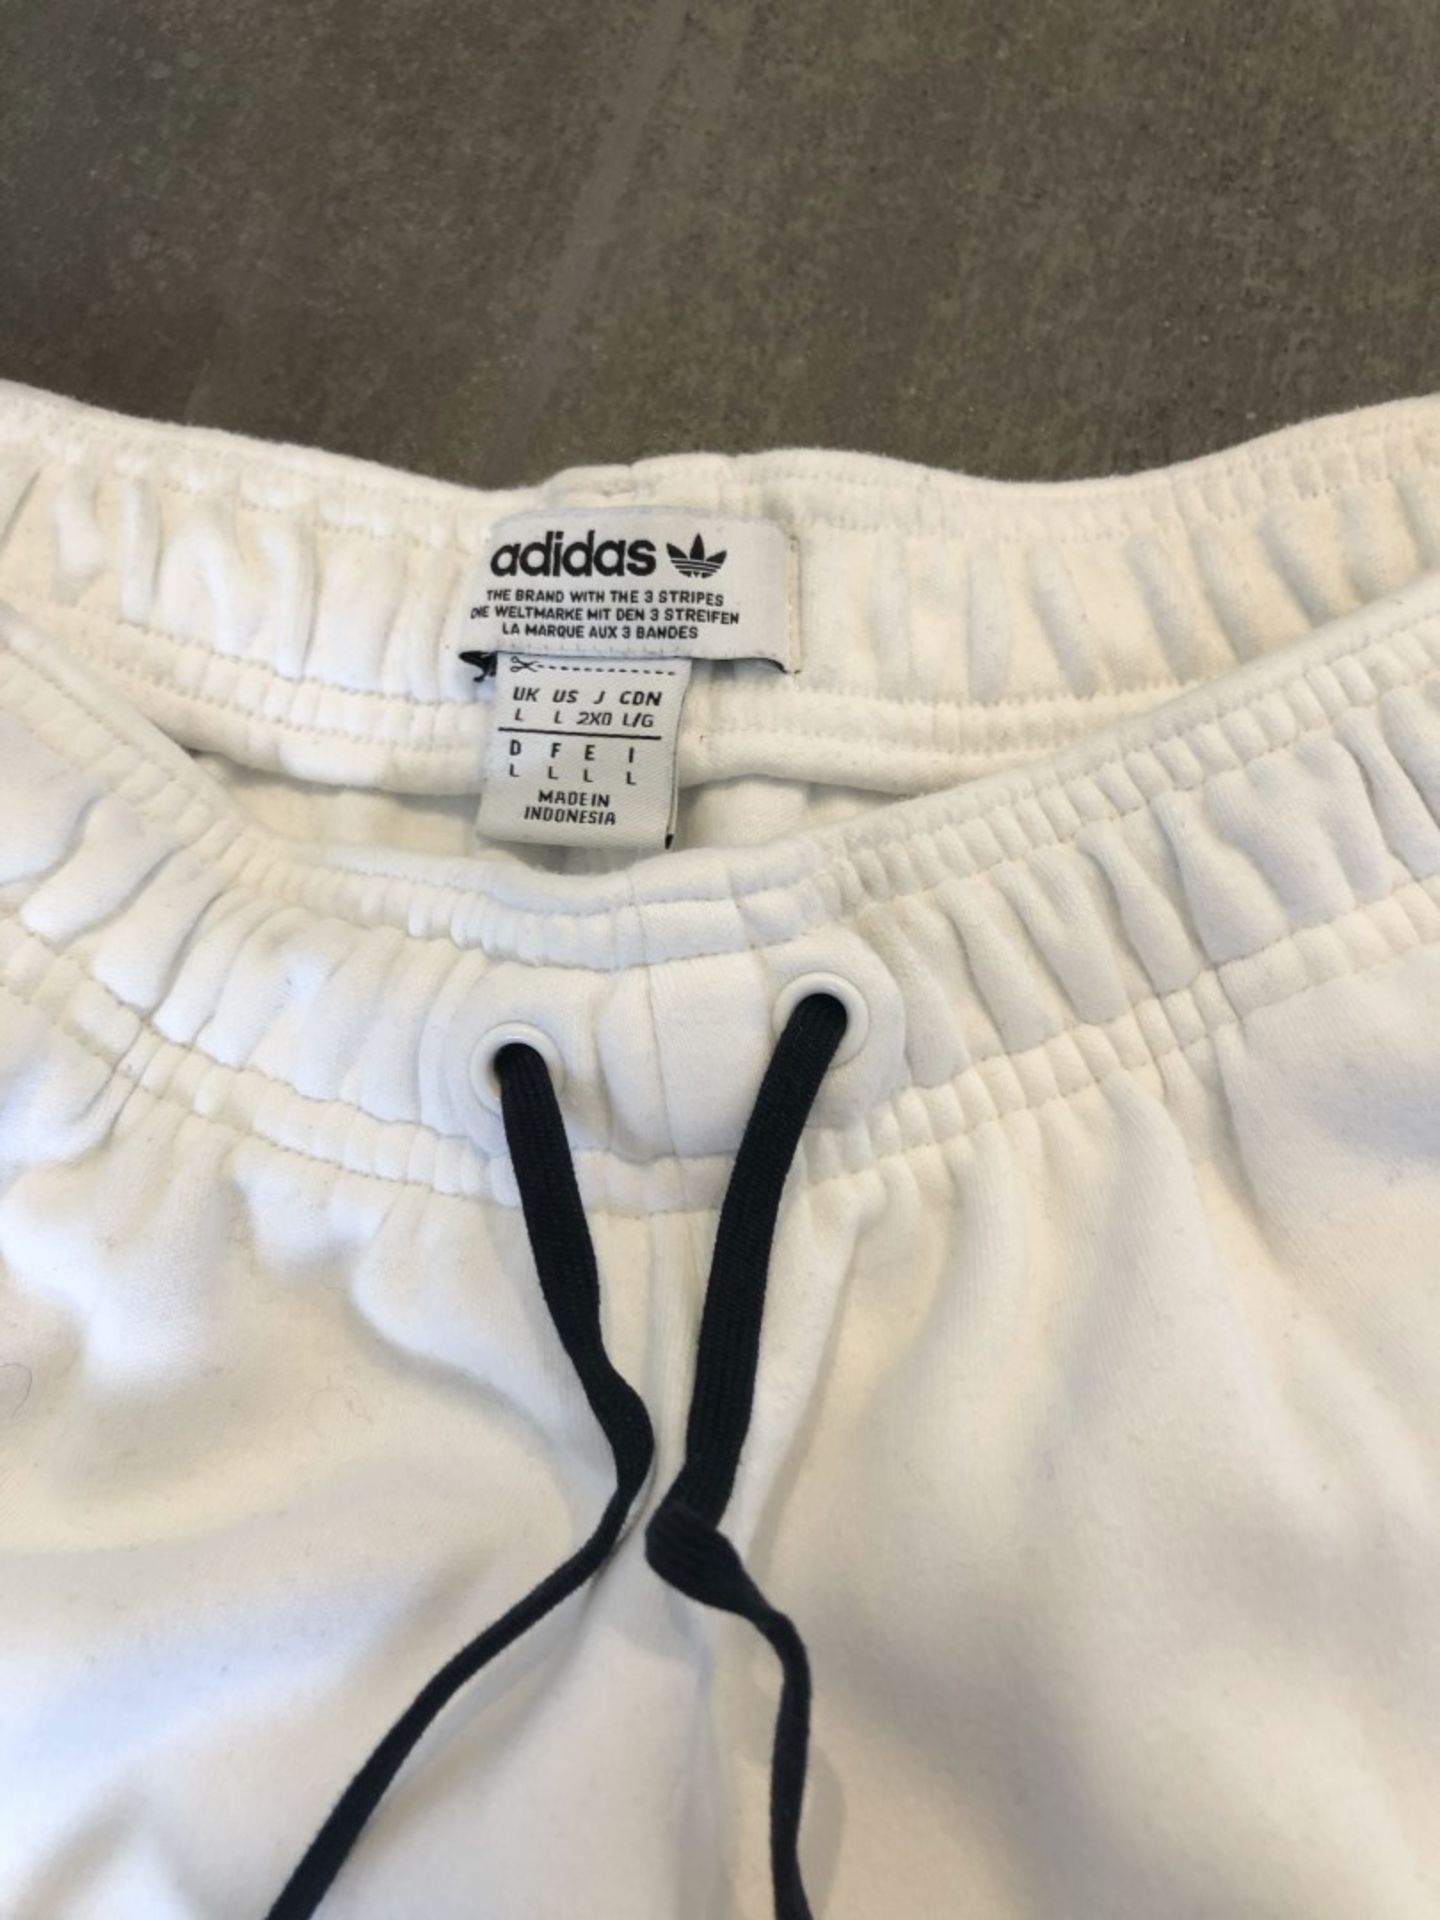 1 x Pair Of Men's Genuine Adidas Shorts In White - Size (EU/UK): L/L - Preowned - Ref: JS126 - NO - Image 8 of 9